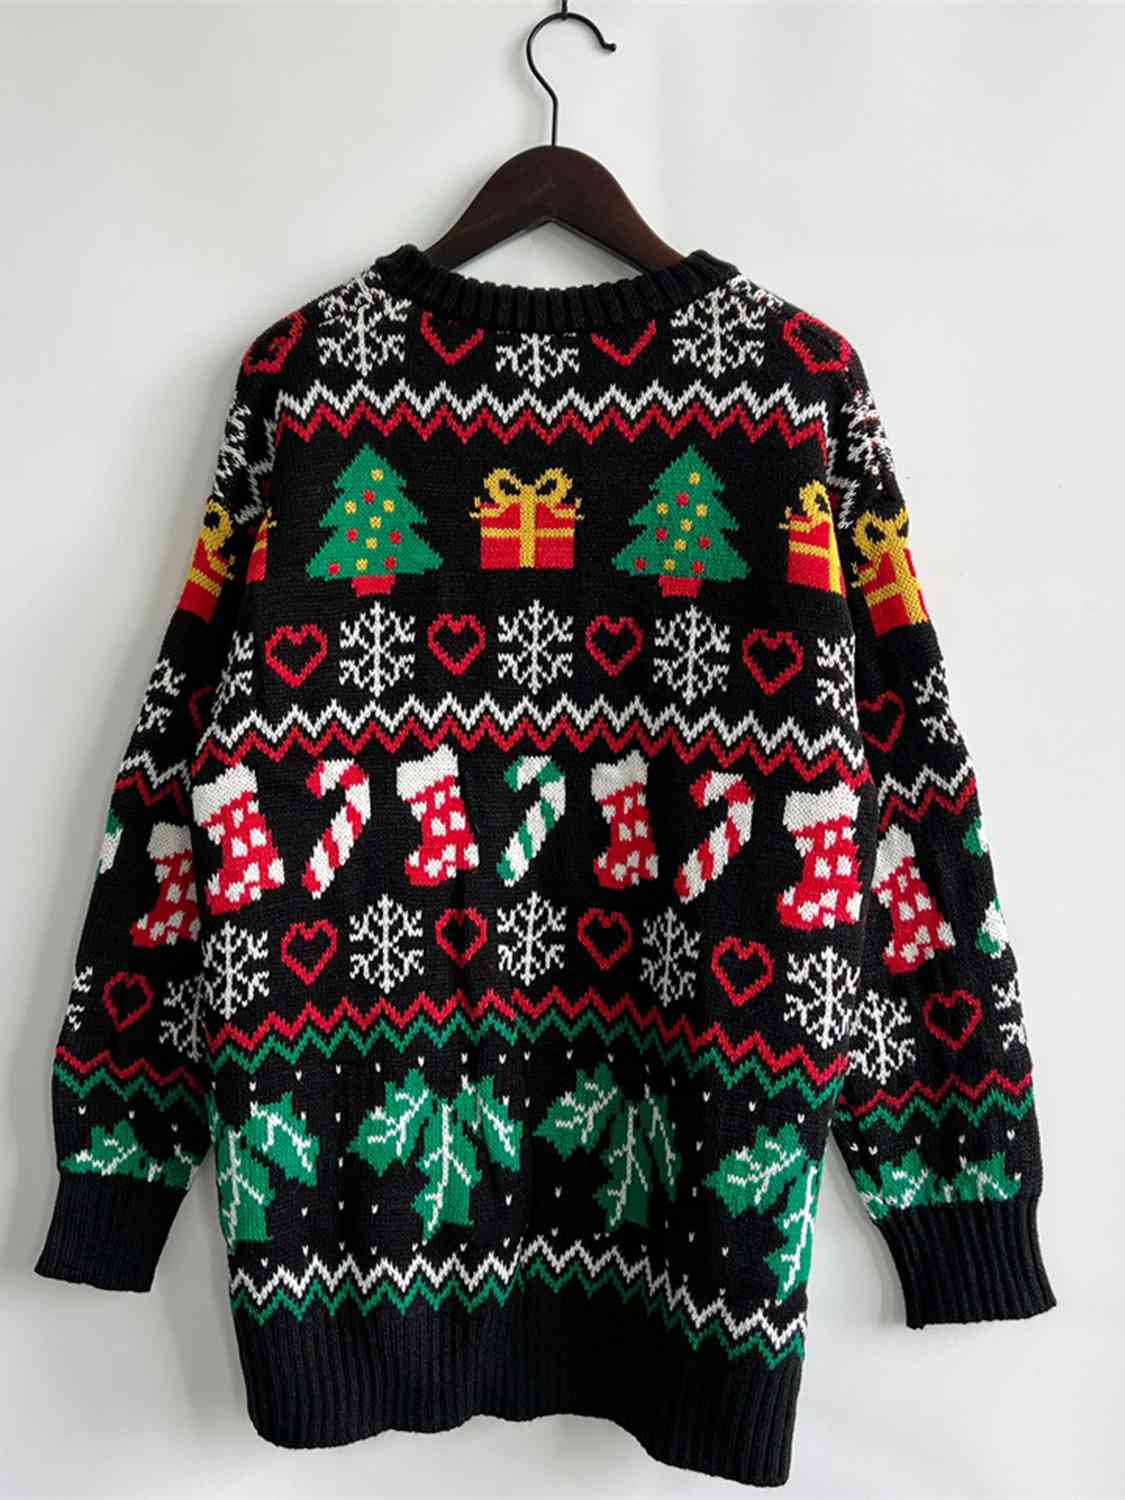 Festive Knit Santa Candy Canes Trees Round Neck Holiday Sweater Top